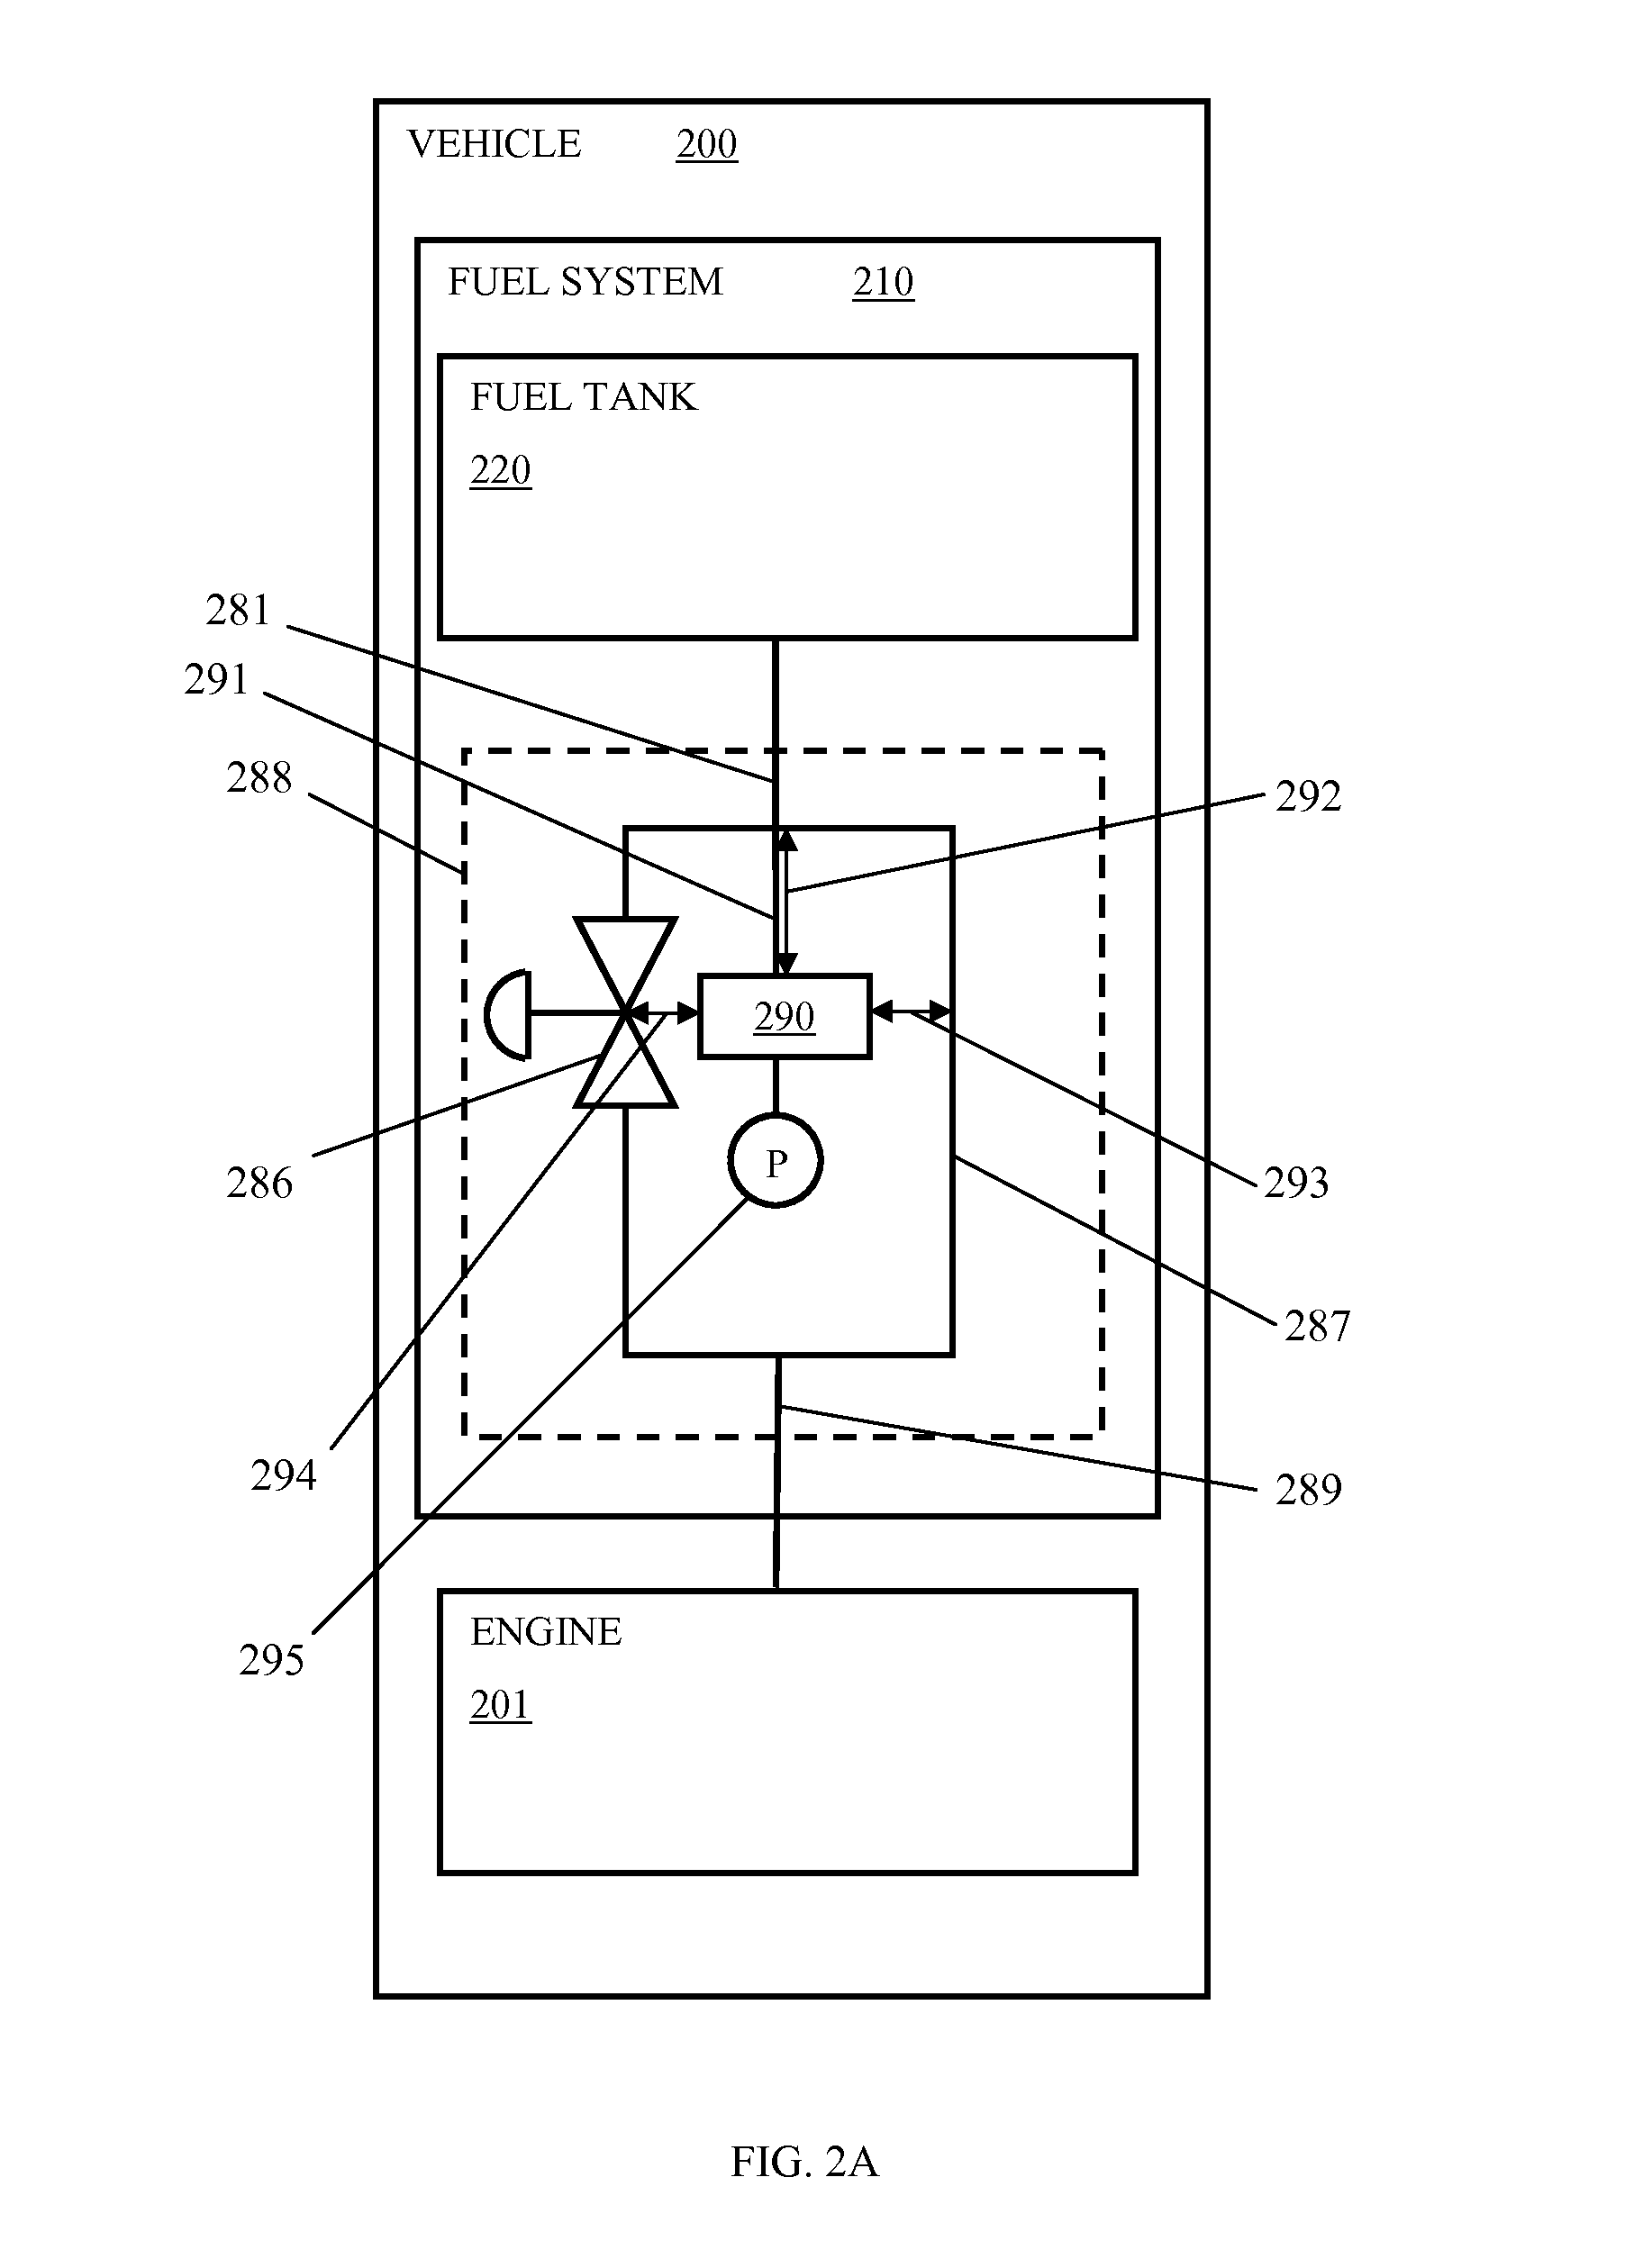 Systems and methods for regulating fuel systems